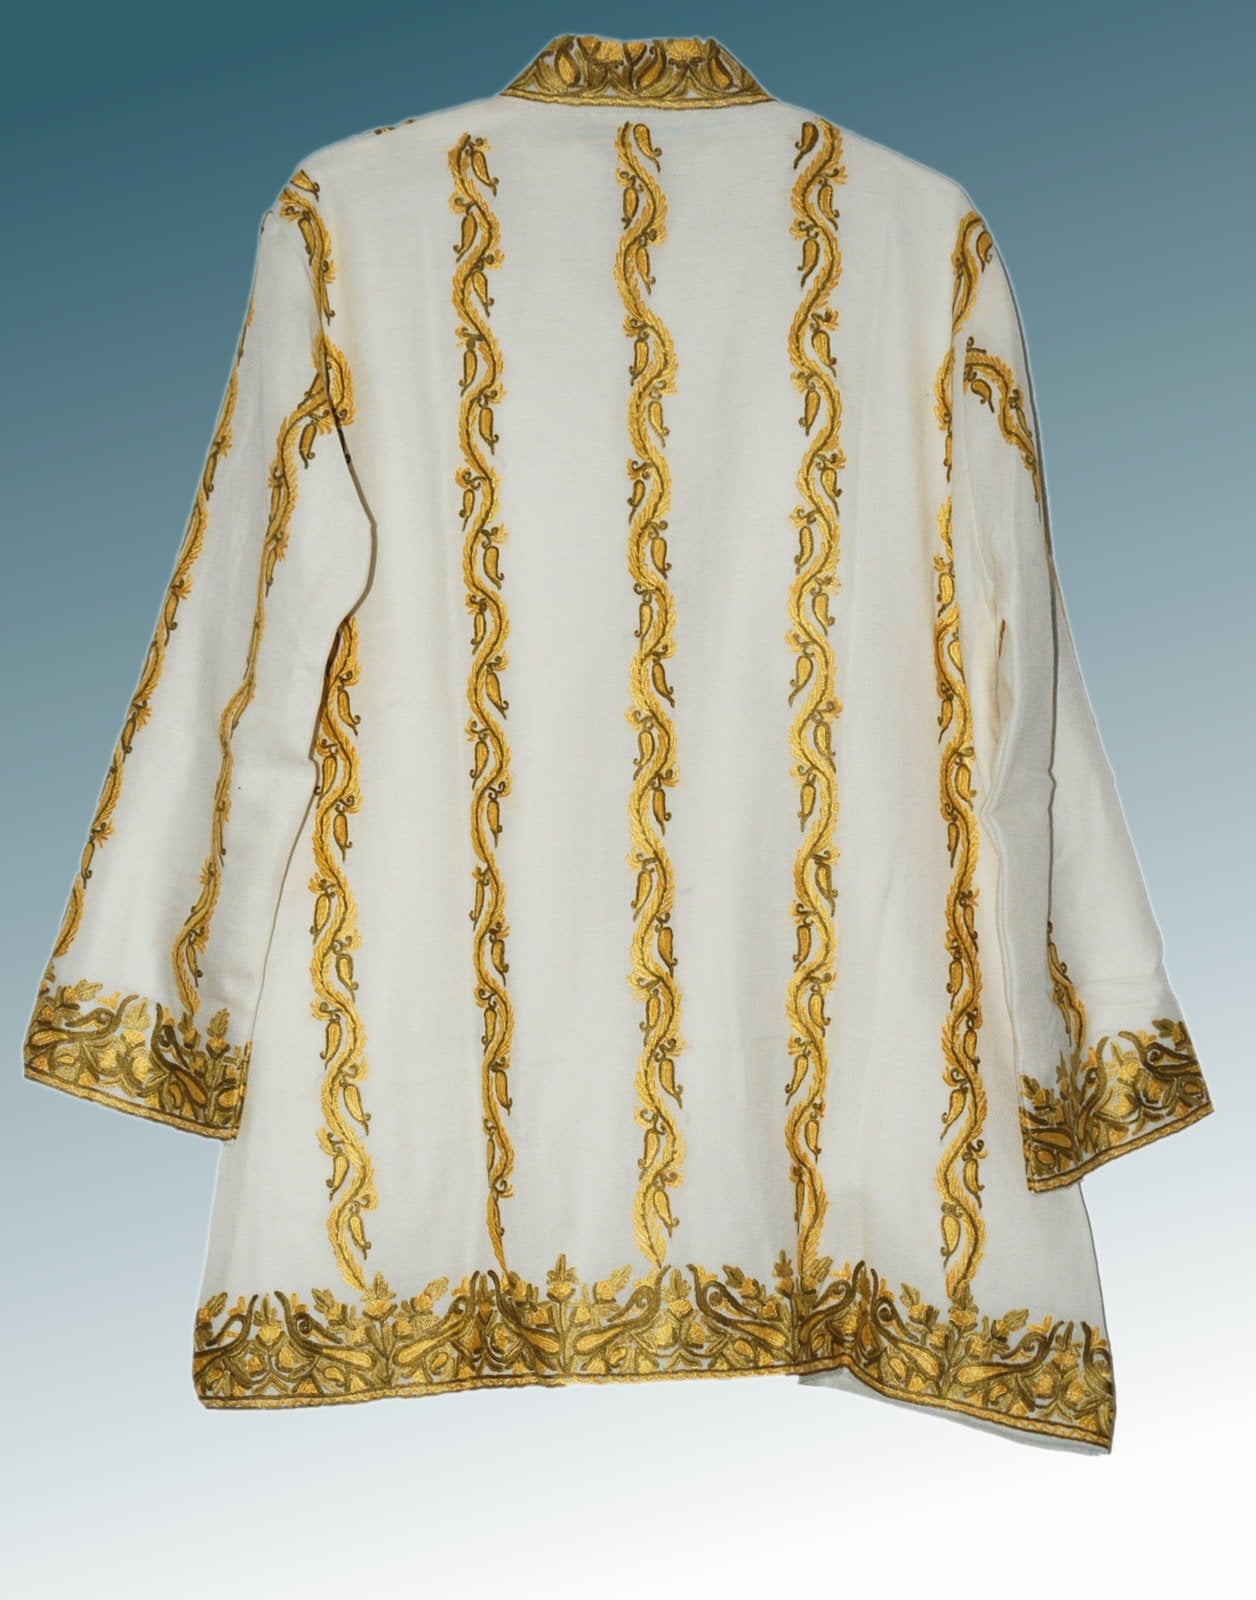 Embroidered Woolen Jacket White, Yellow and Olive Embroidery #AO-0061